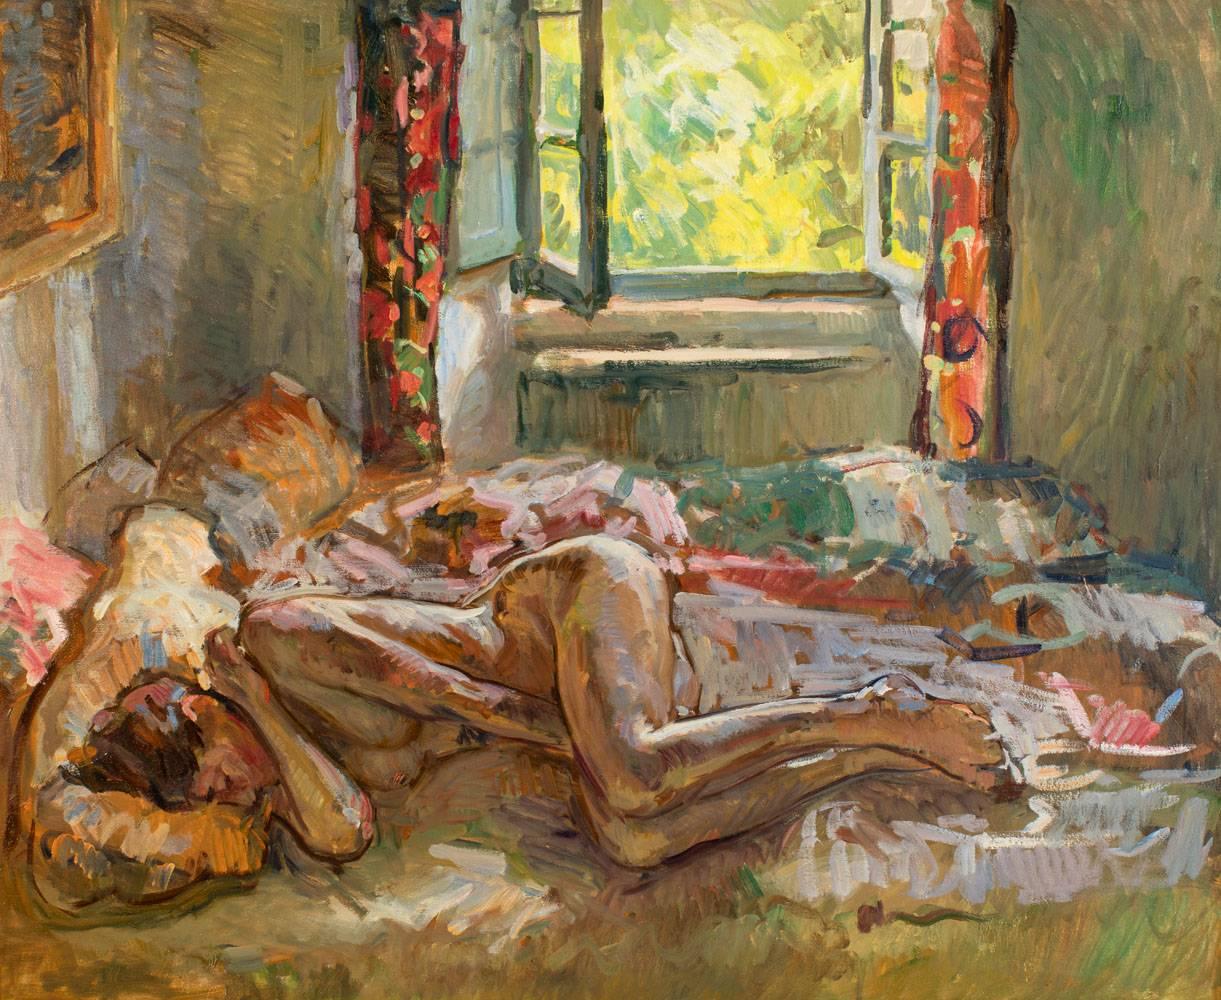 Ben Fenske Nude Painting - "Daydream" contemporary impressionist painting, reclining nude at rest, colorful